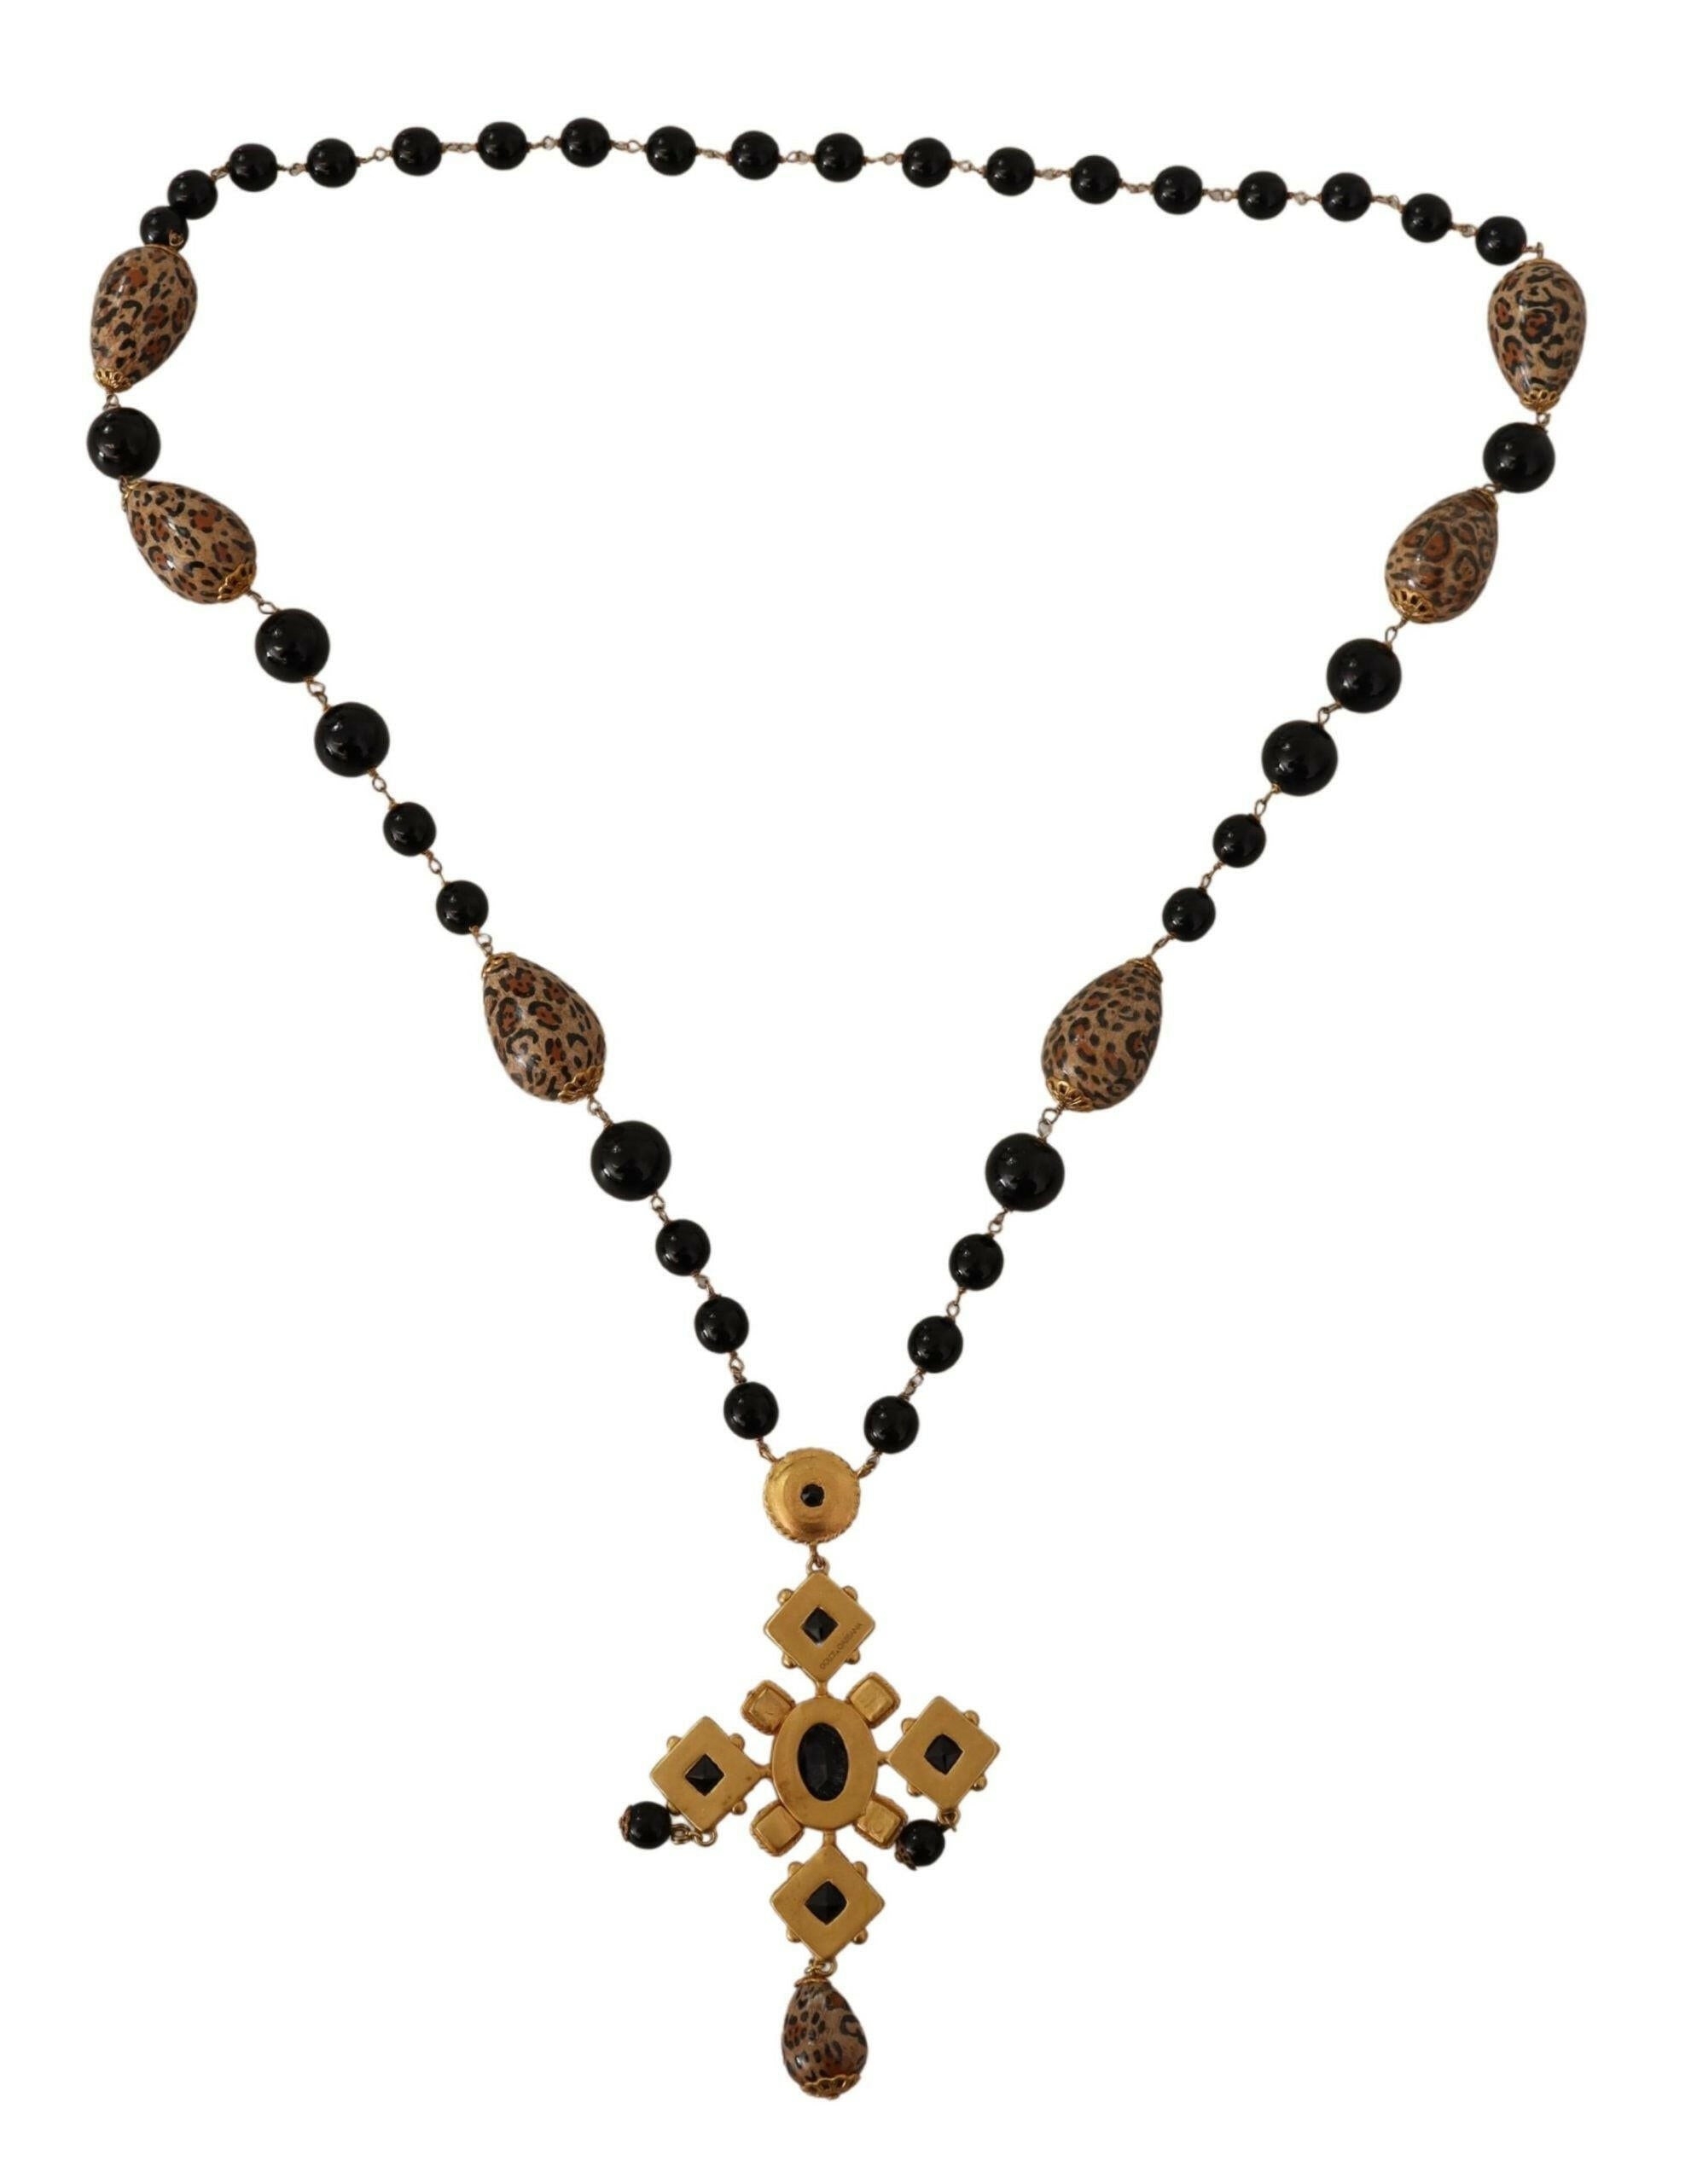 Dolce & Gabbana Elegant Charm Cross Necklace with Crystal Details.